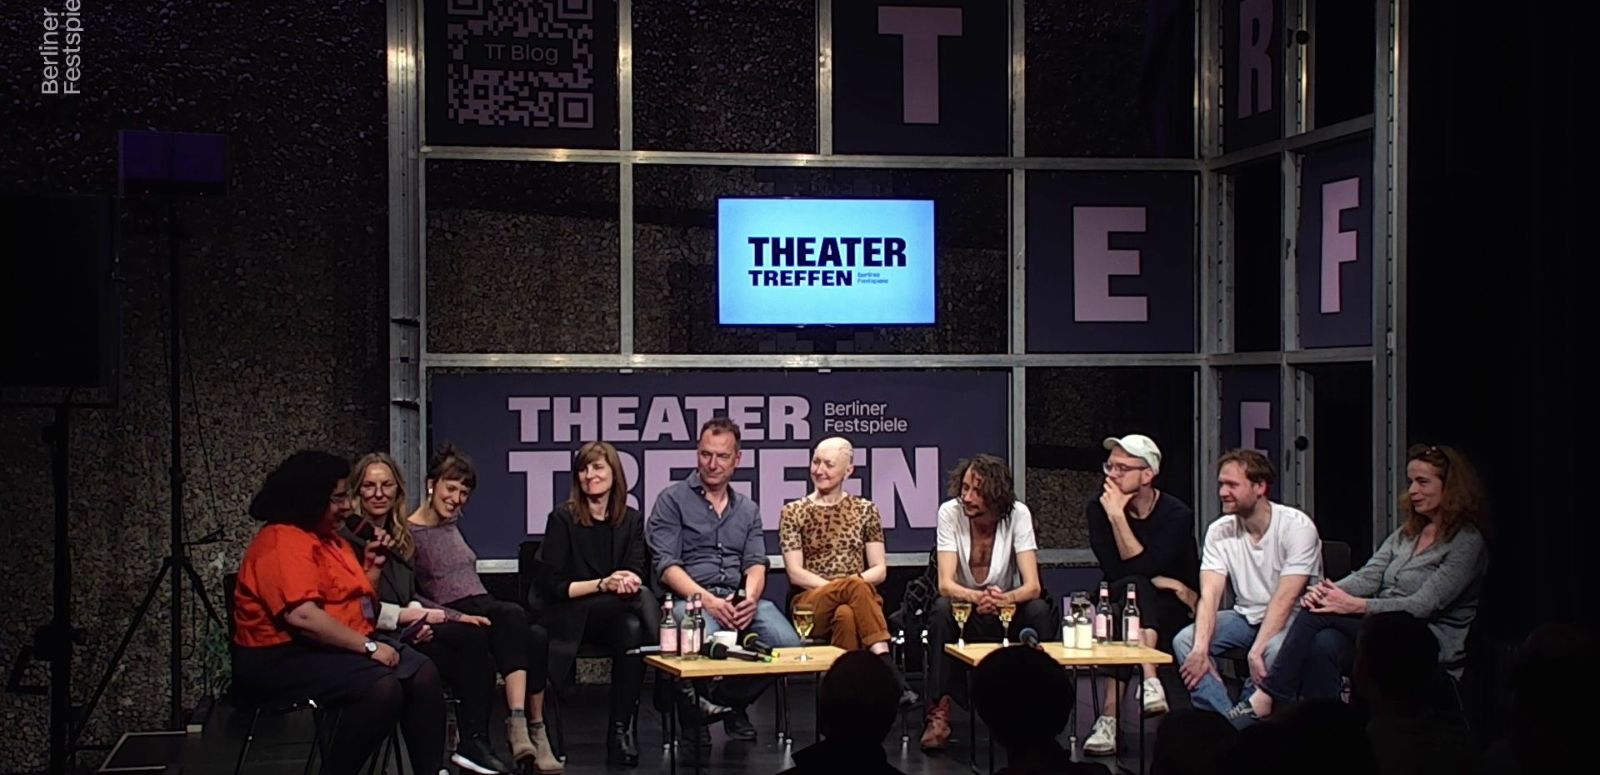 A group of 10 people discuss on a stage. 